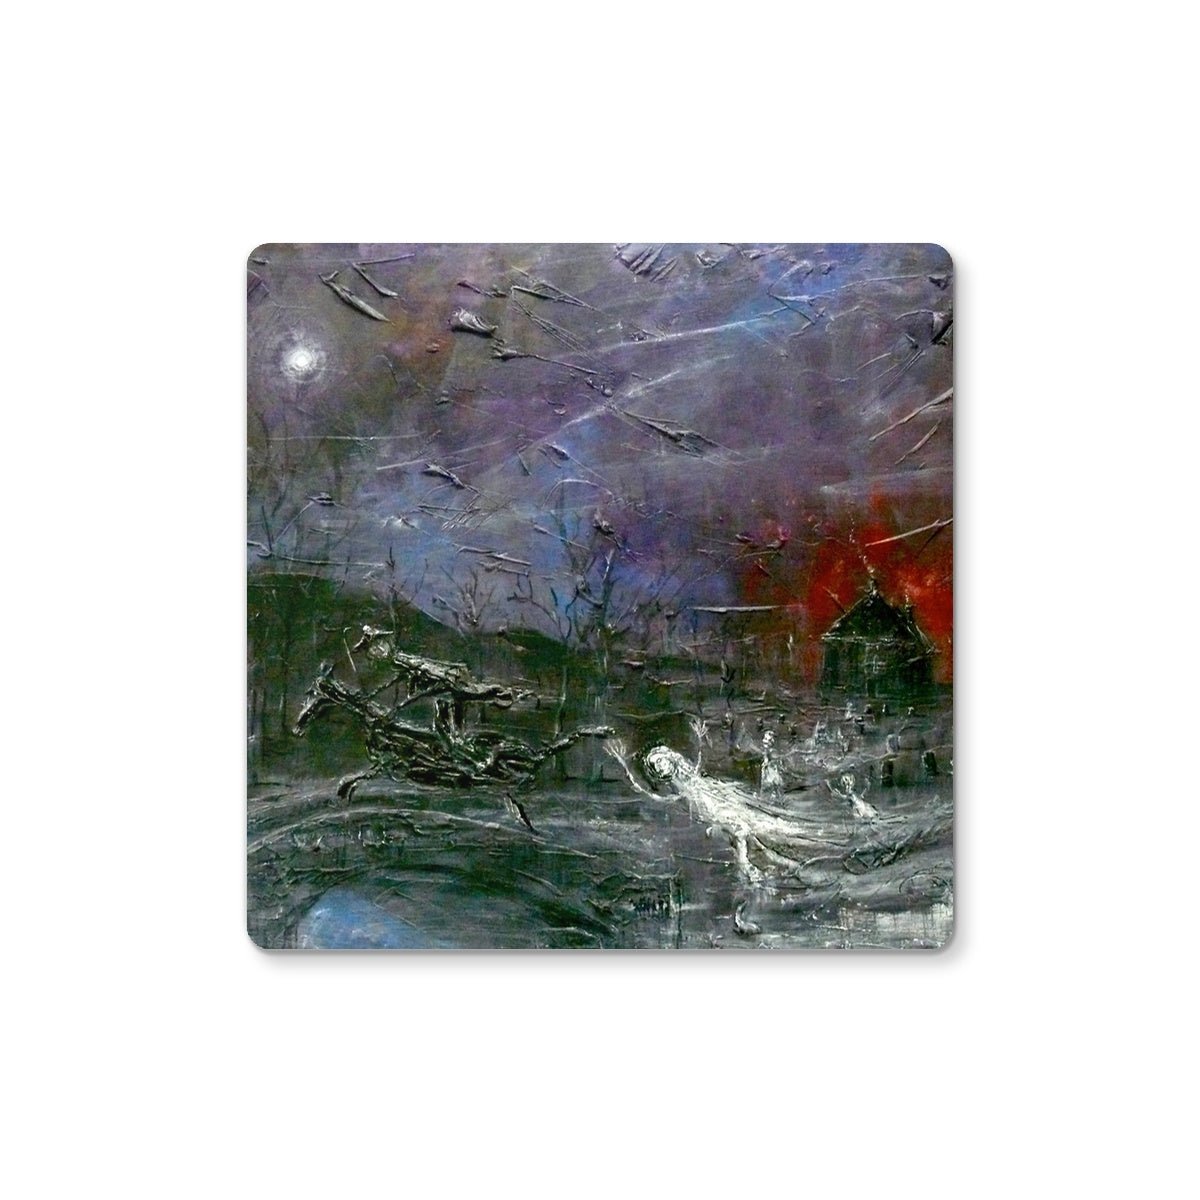 Tam O Shanter Art Gifts Coaster-Coasters-Abstract & Impressionistic Art Gallery-2 Coasters-Paintings, Prints, Homeware, Art Gifts From Scotland By Scottish Artist Kevin Hunter